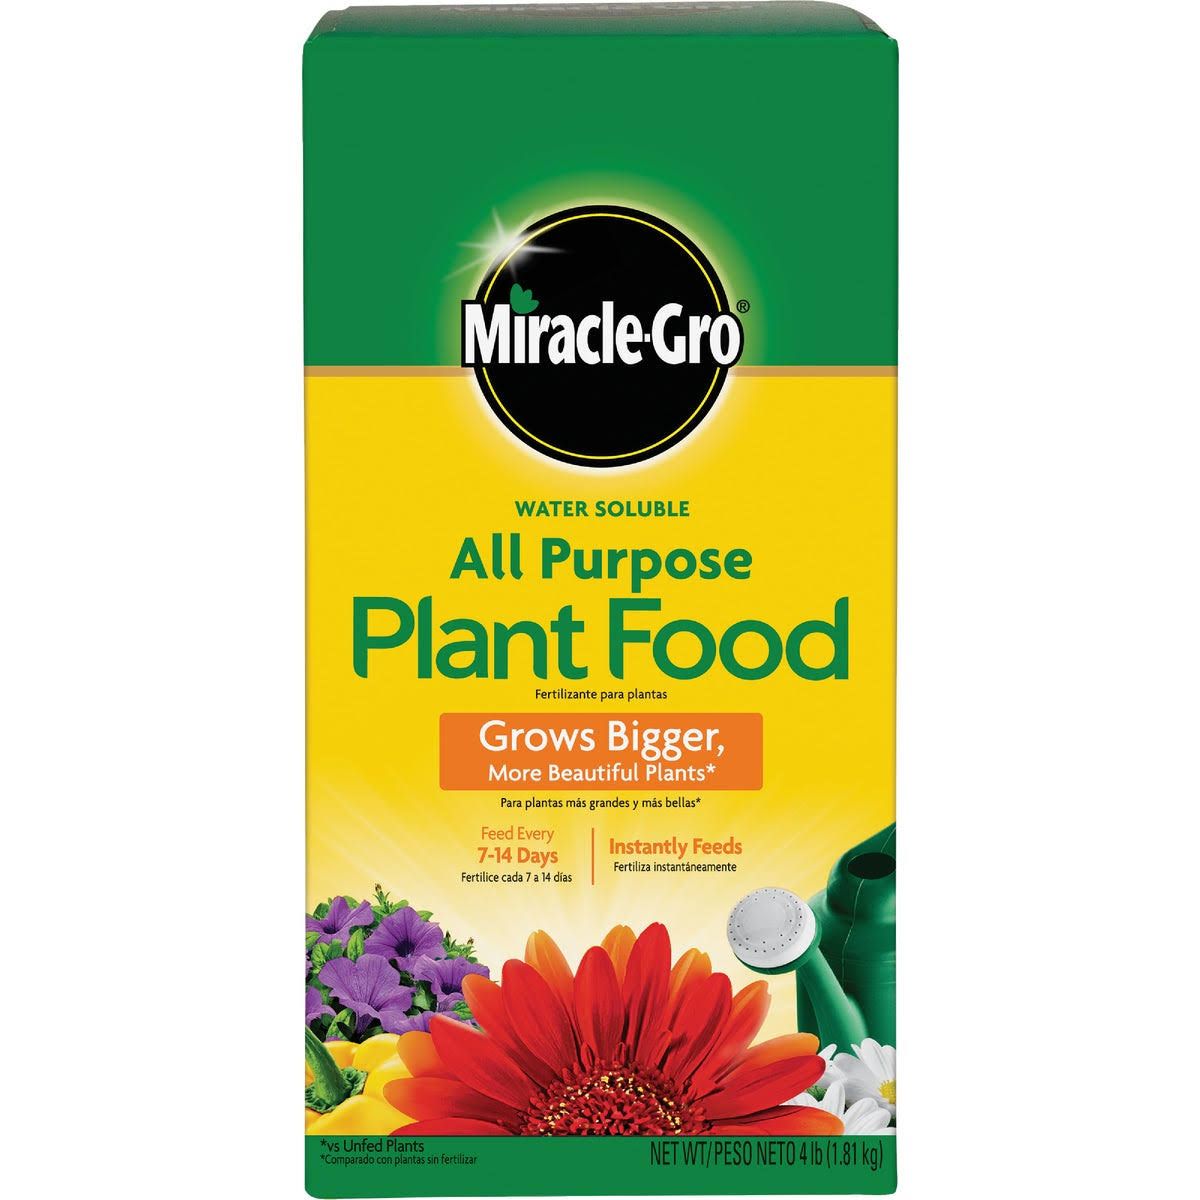 The Scotts Company Miracle Grow Water Soluble All Purpose Plant Food